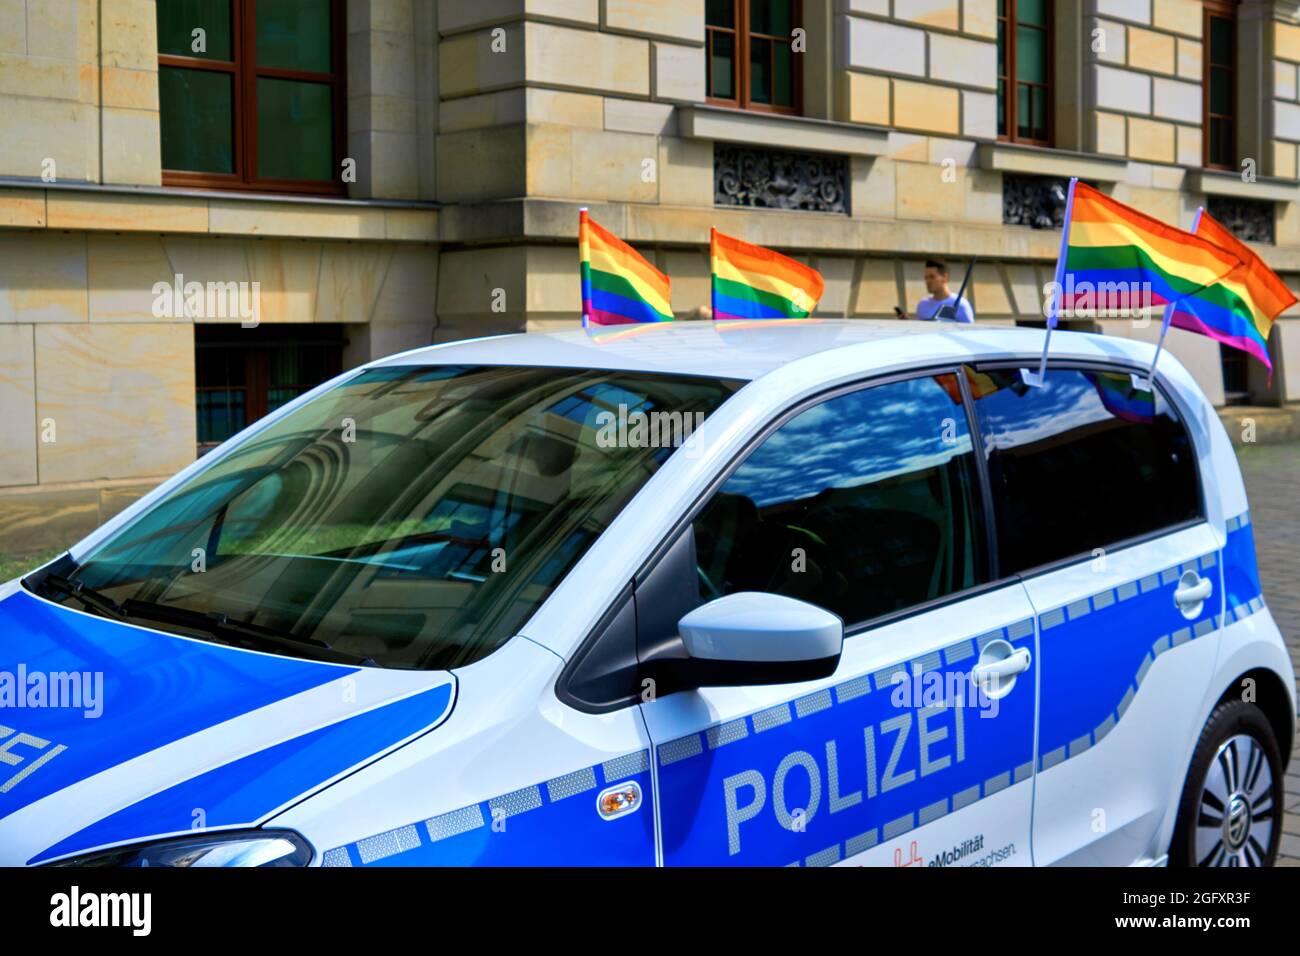 Braunschweig, Germany, August 14, 2021: Police car decorated with rainbow flags while driving at CSD Stock Photo